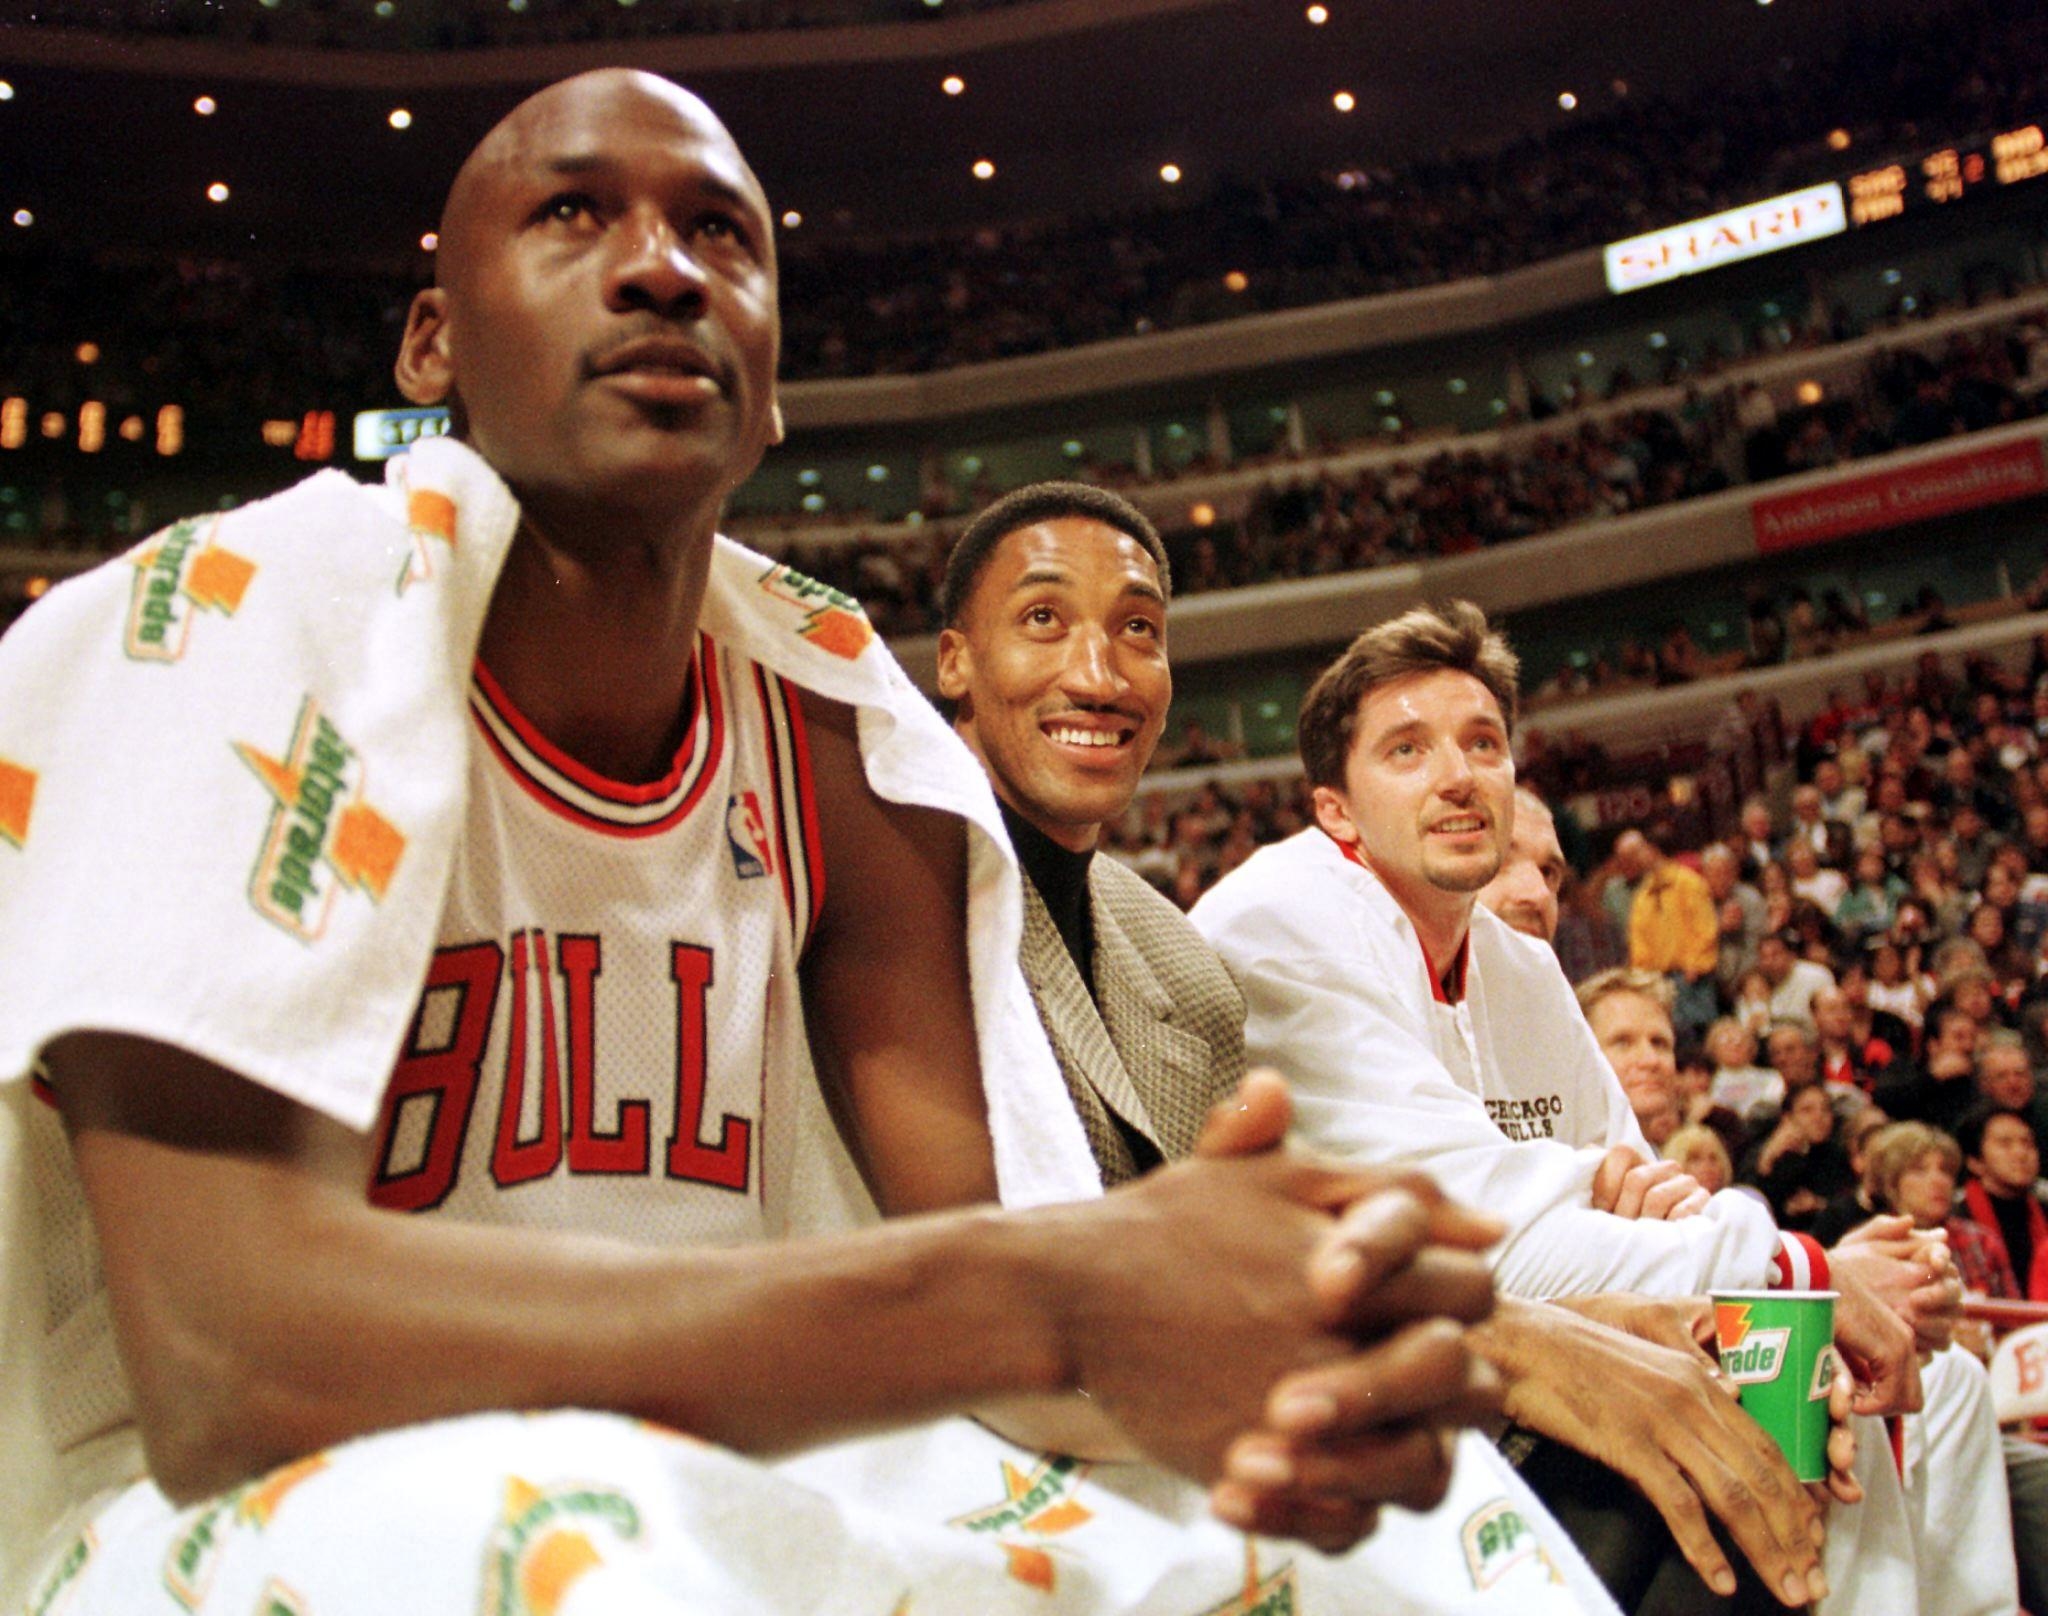 Chicago Bulls guard Michael Jordan (L), injured forward Scottie Pippen (C) and forward Toni Kukoc watch their teammates play against the Milwaukee Bucks during the second quarter 05 December at the United Center, in Chicago, IL.  Pippen has demanded that he be traded to another team following his recovery from foot surgery.  AFP PHOTO/VINCENT LAFORET (Photo by VINCENT LAFORET / AFP)